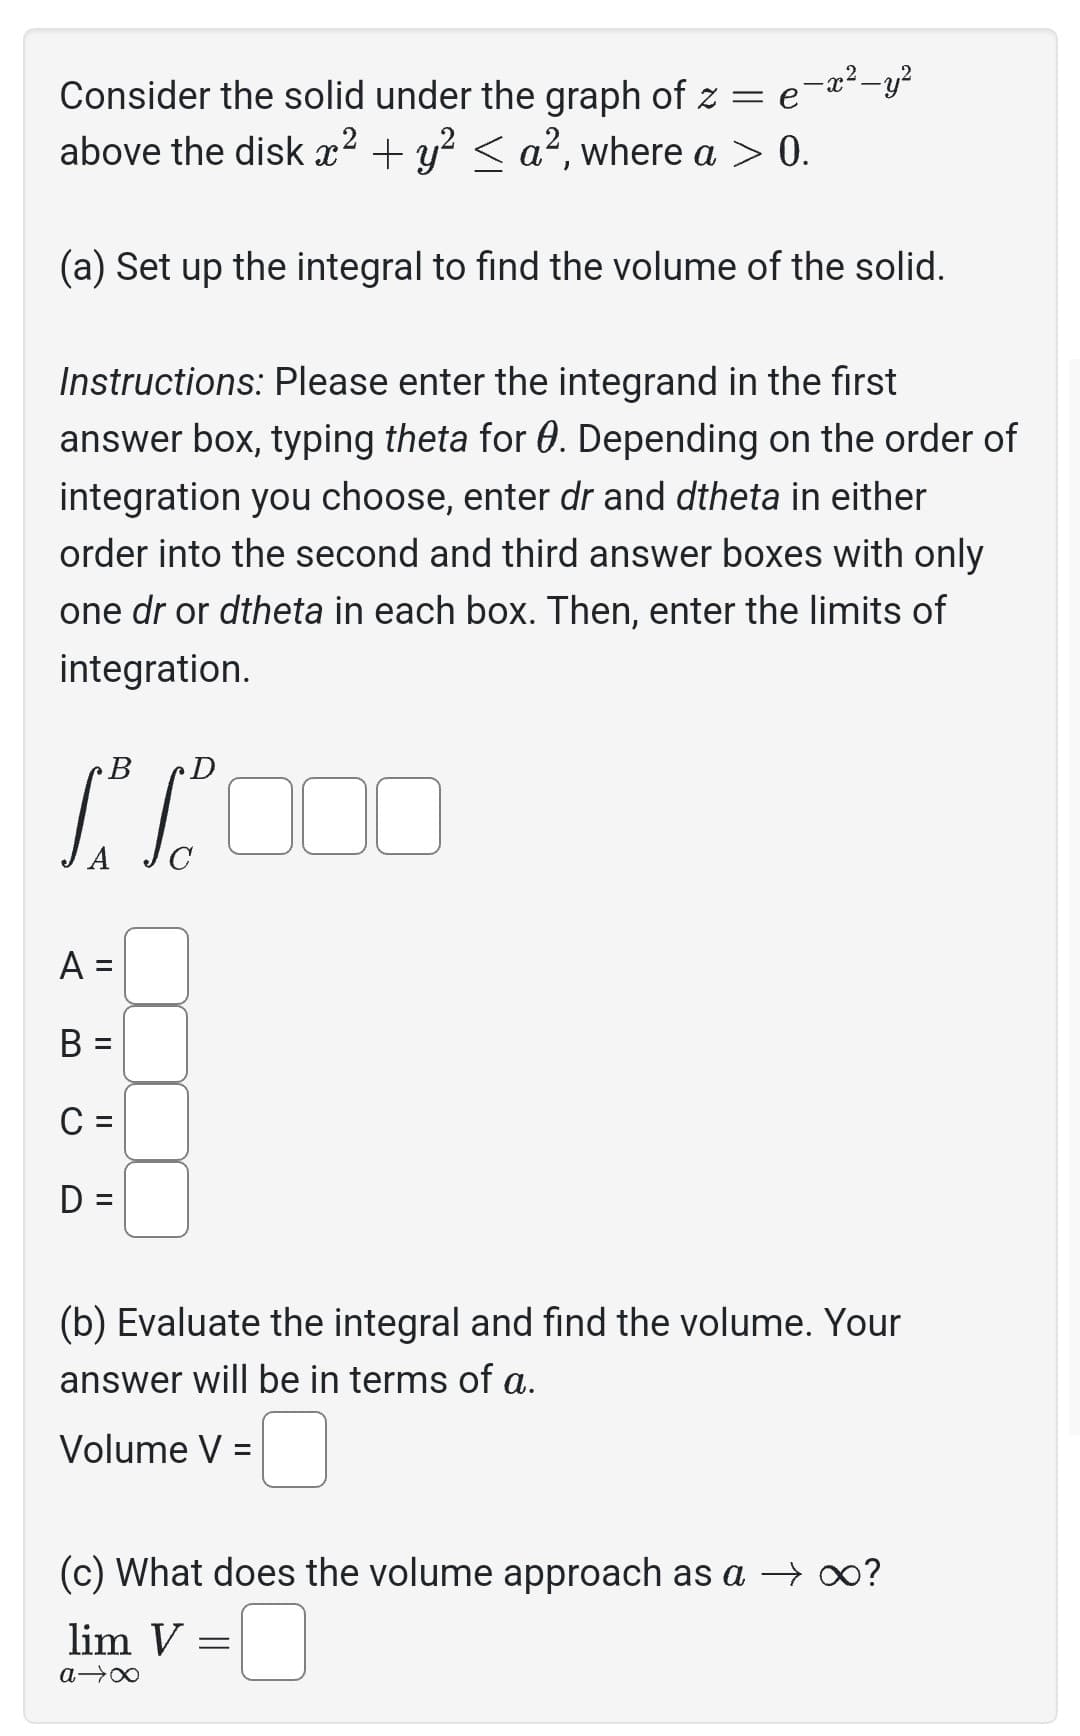 Consider the solid under the graph of z =
e-x²-y²
above the disk x² + y² ≤ a², where a > 0.
(a) Set up the integral to find the volume of the solid.
Instructions: Please enter the integrand in the first
answer box, typing theta for 0. Depending on the order of
integration you choose, enter dr and dtheta in either
order into the second and third answer boxes with only
one dr or dtheta in each box. Then, enter the limits of
integration.
B
D
1² 1² 000
A
B =
C =
D =
||
(b) Evaluate the integral and find the volume. Your
answer will be in terms of a.
Volume V =
(c) What does the volume approach as a → ∞?
lim V:
a →∞
=